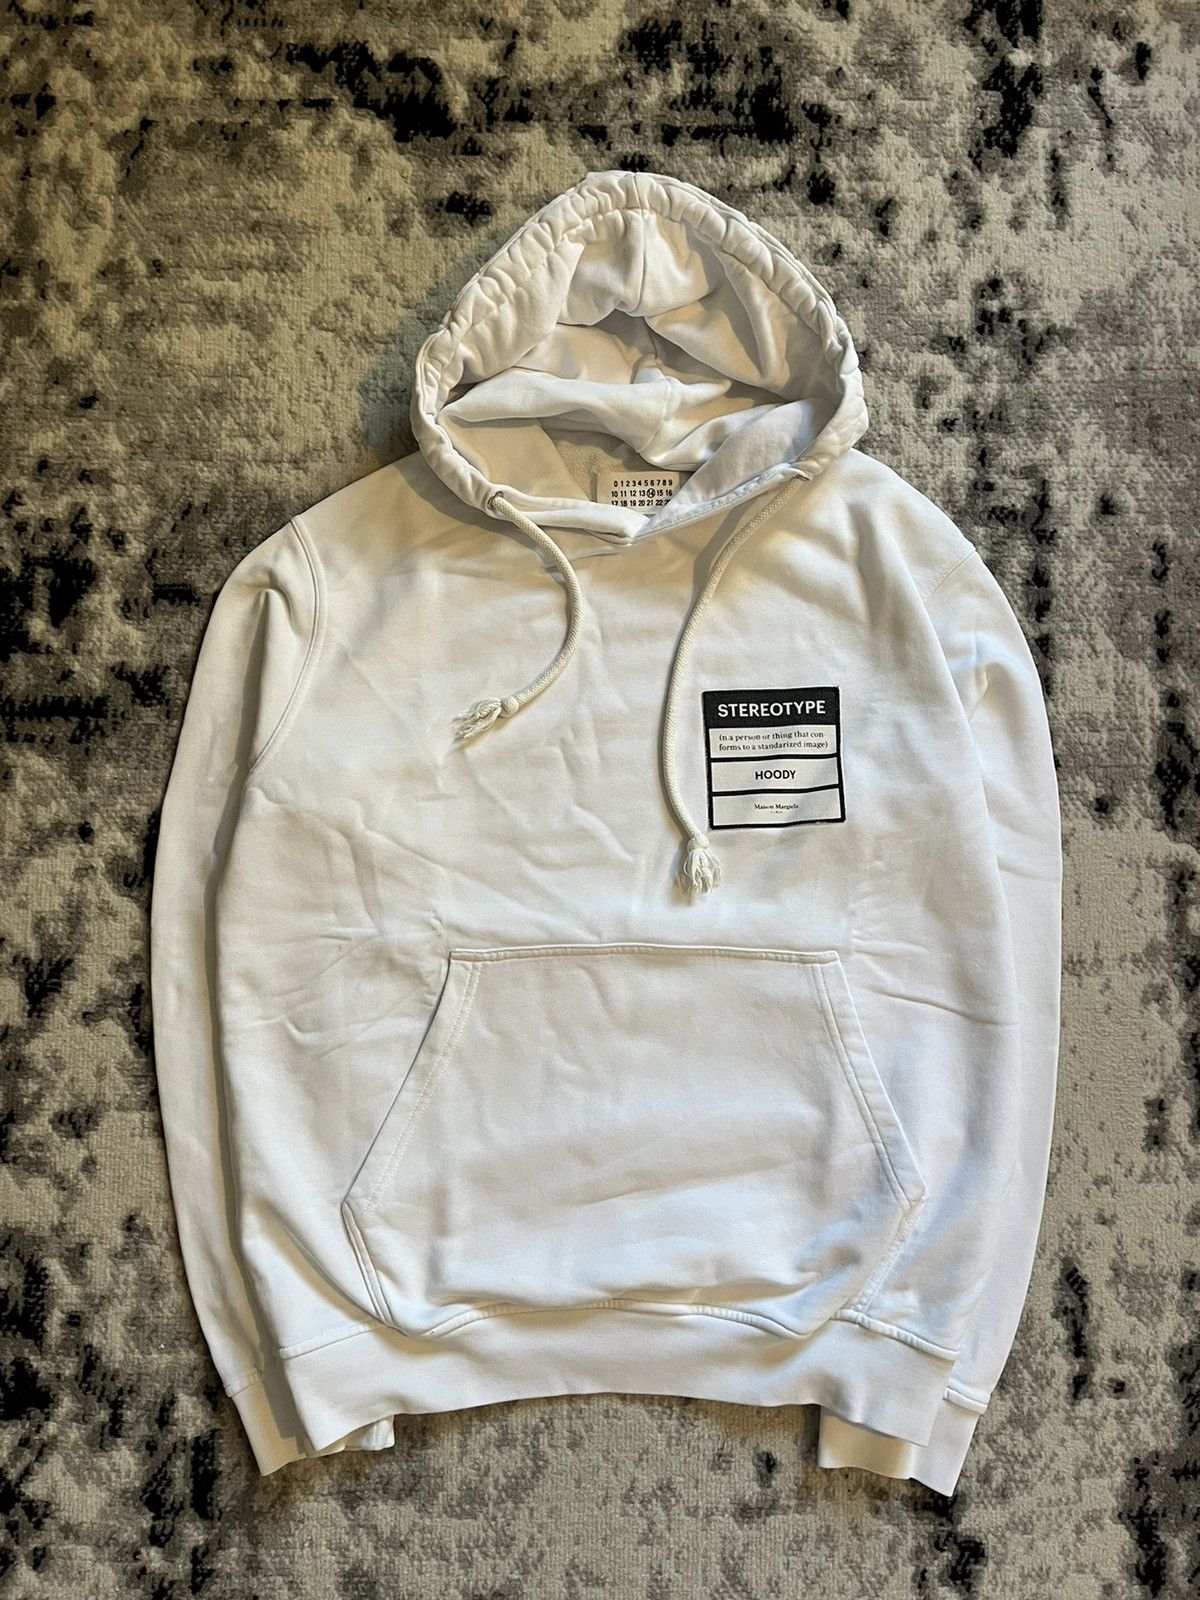 Archival Clothing Maison Margiela White Stereotype Hoodie | Grailed